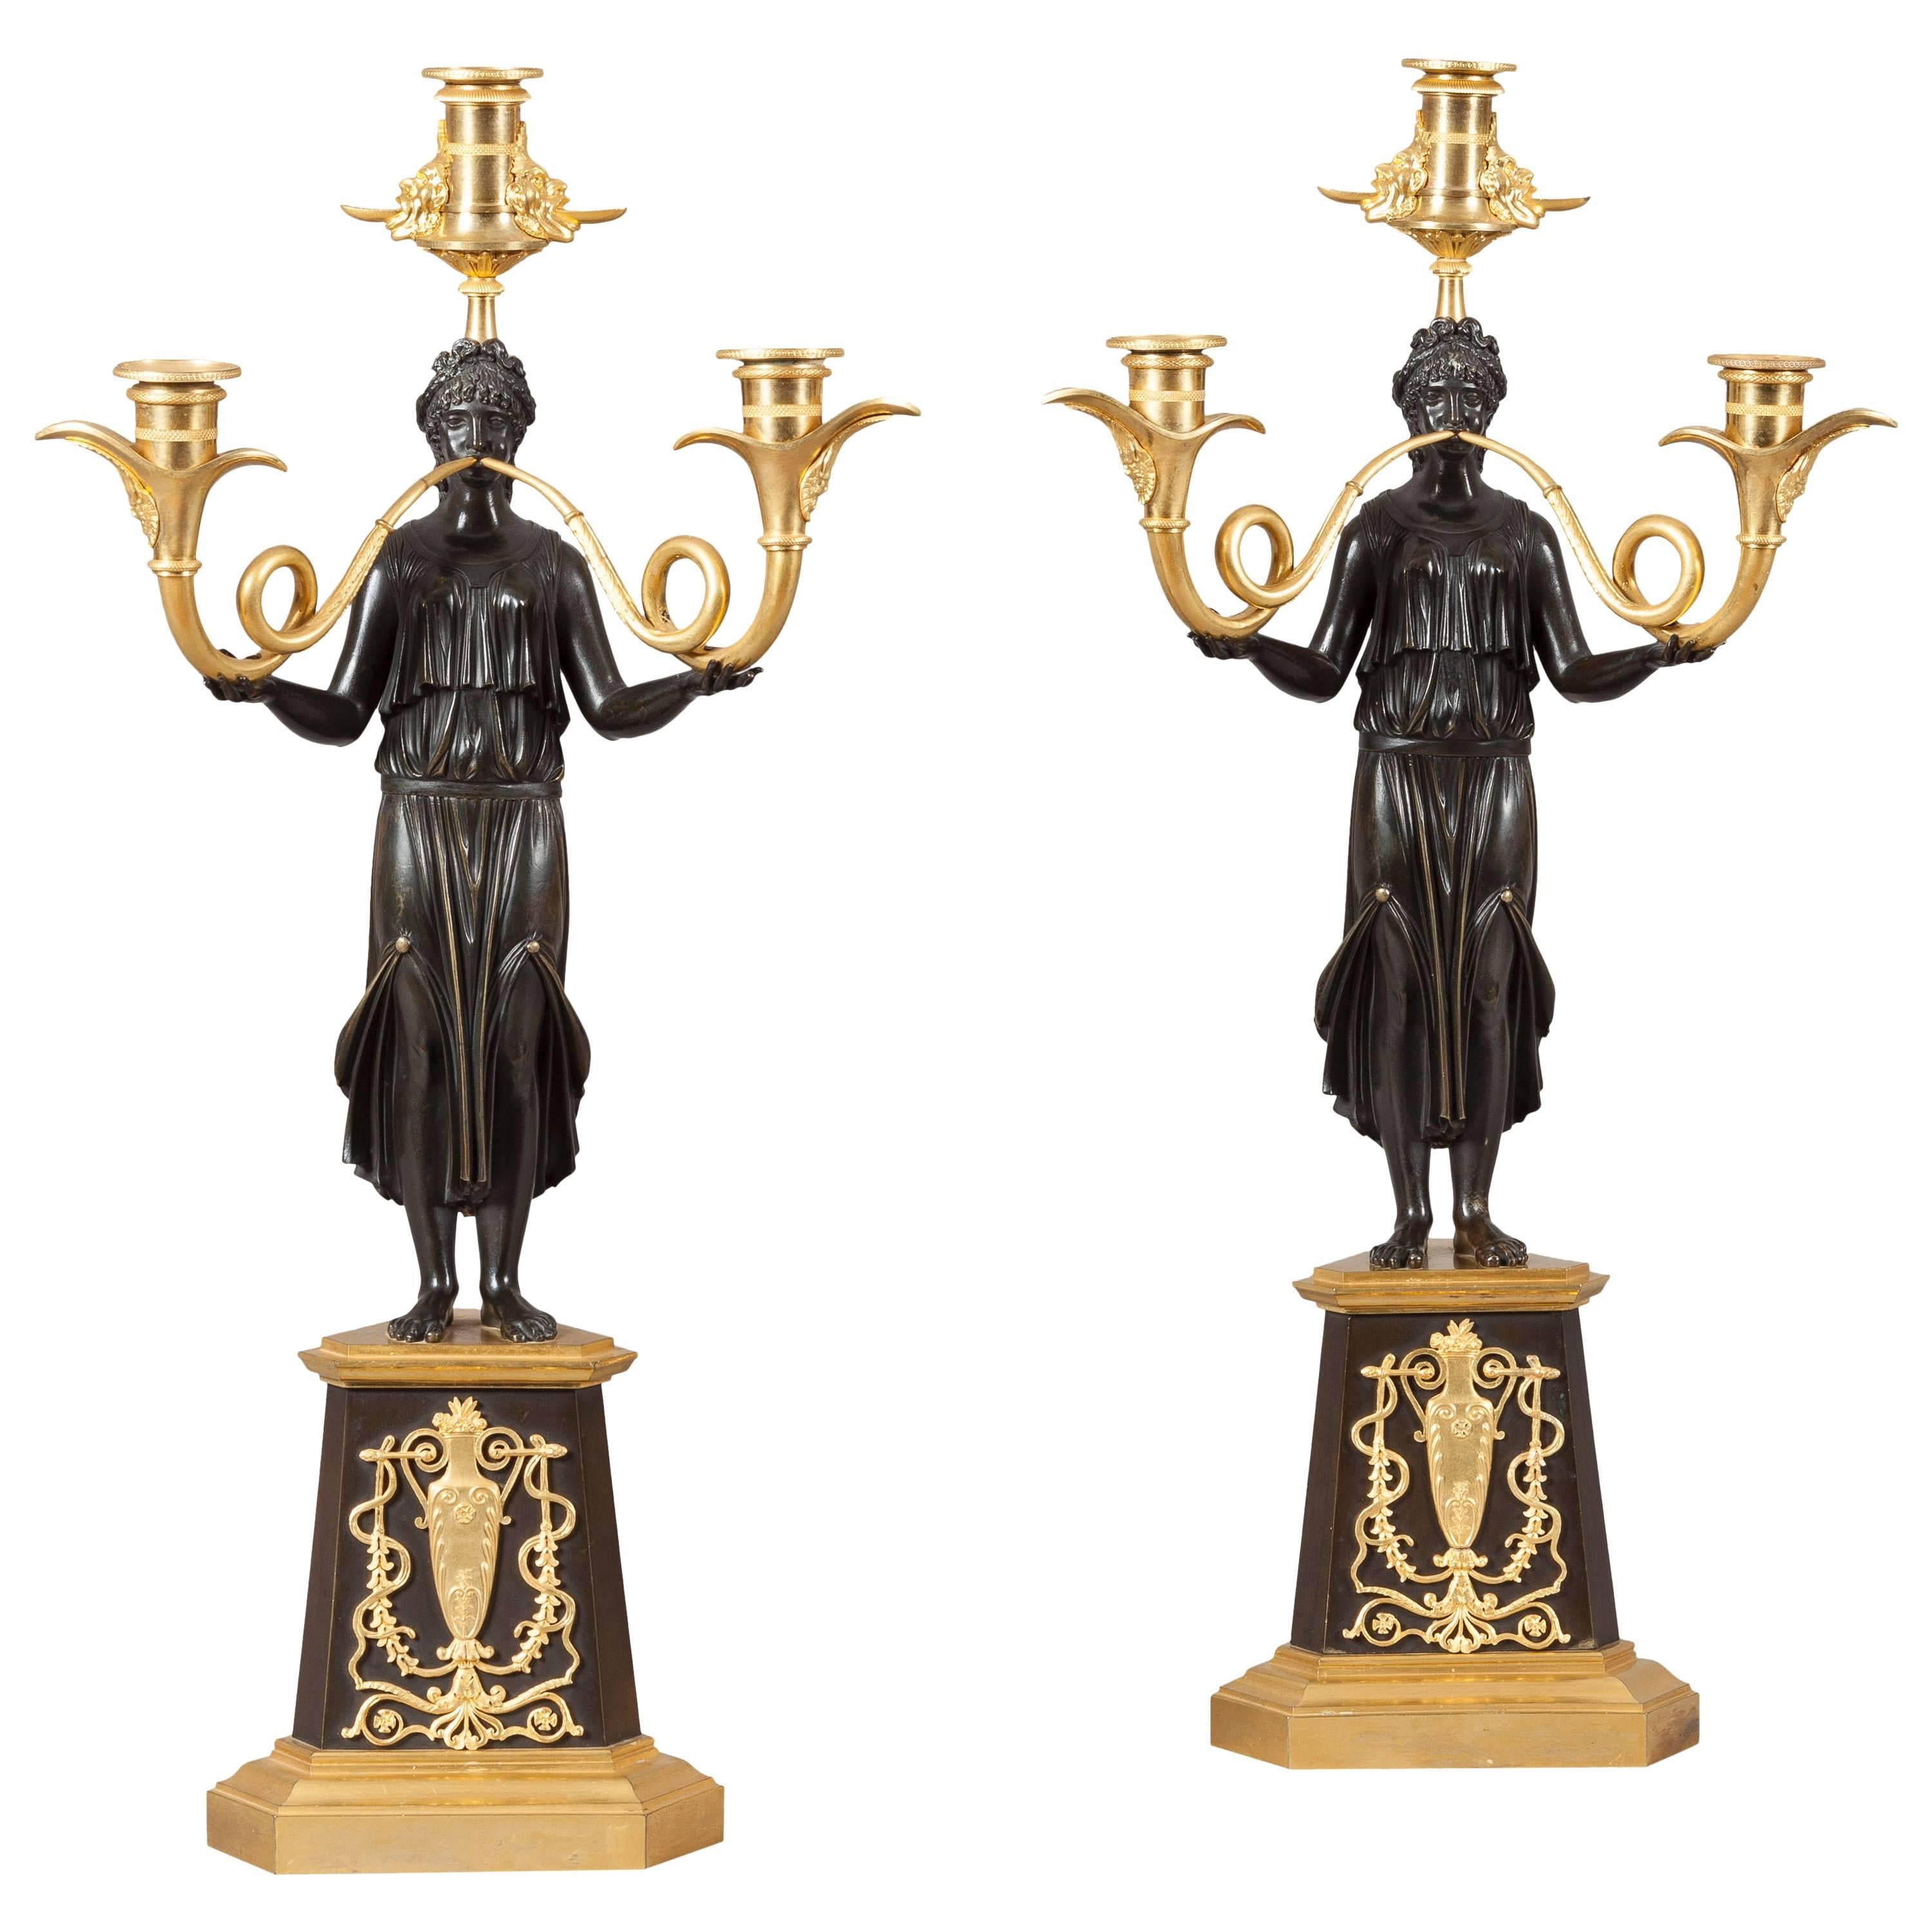 Pair of 19th Century French Gilt and Bronze Candelabra of the Empire Period